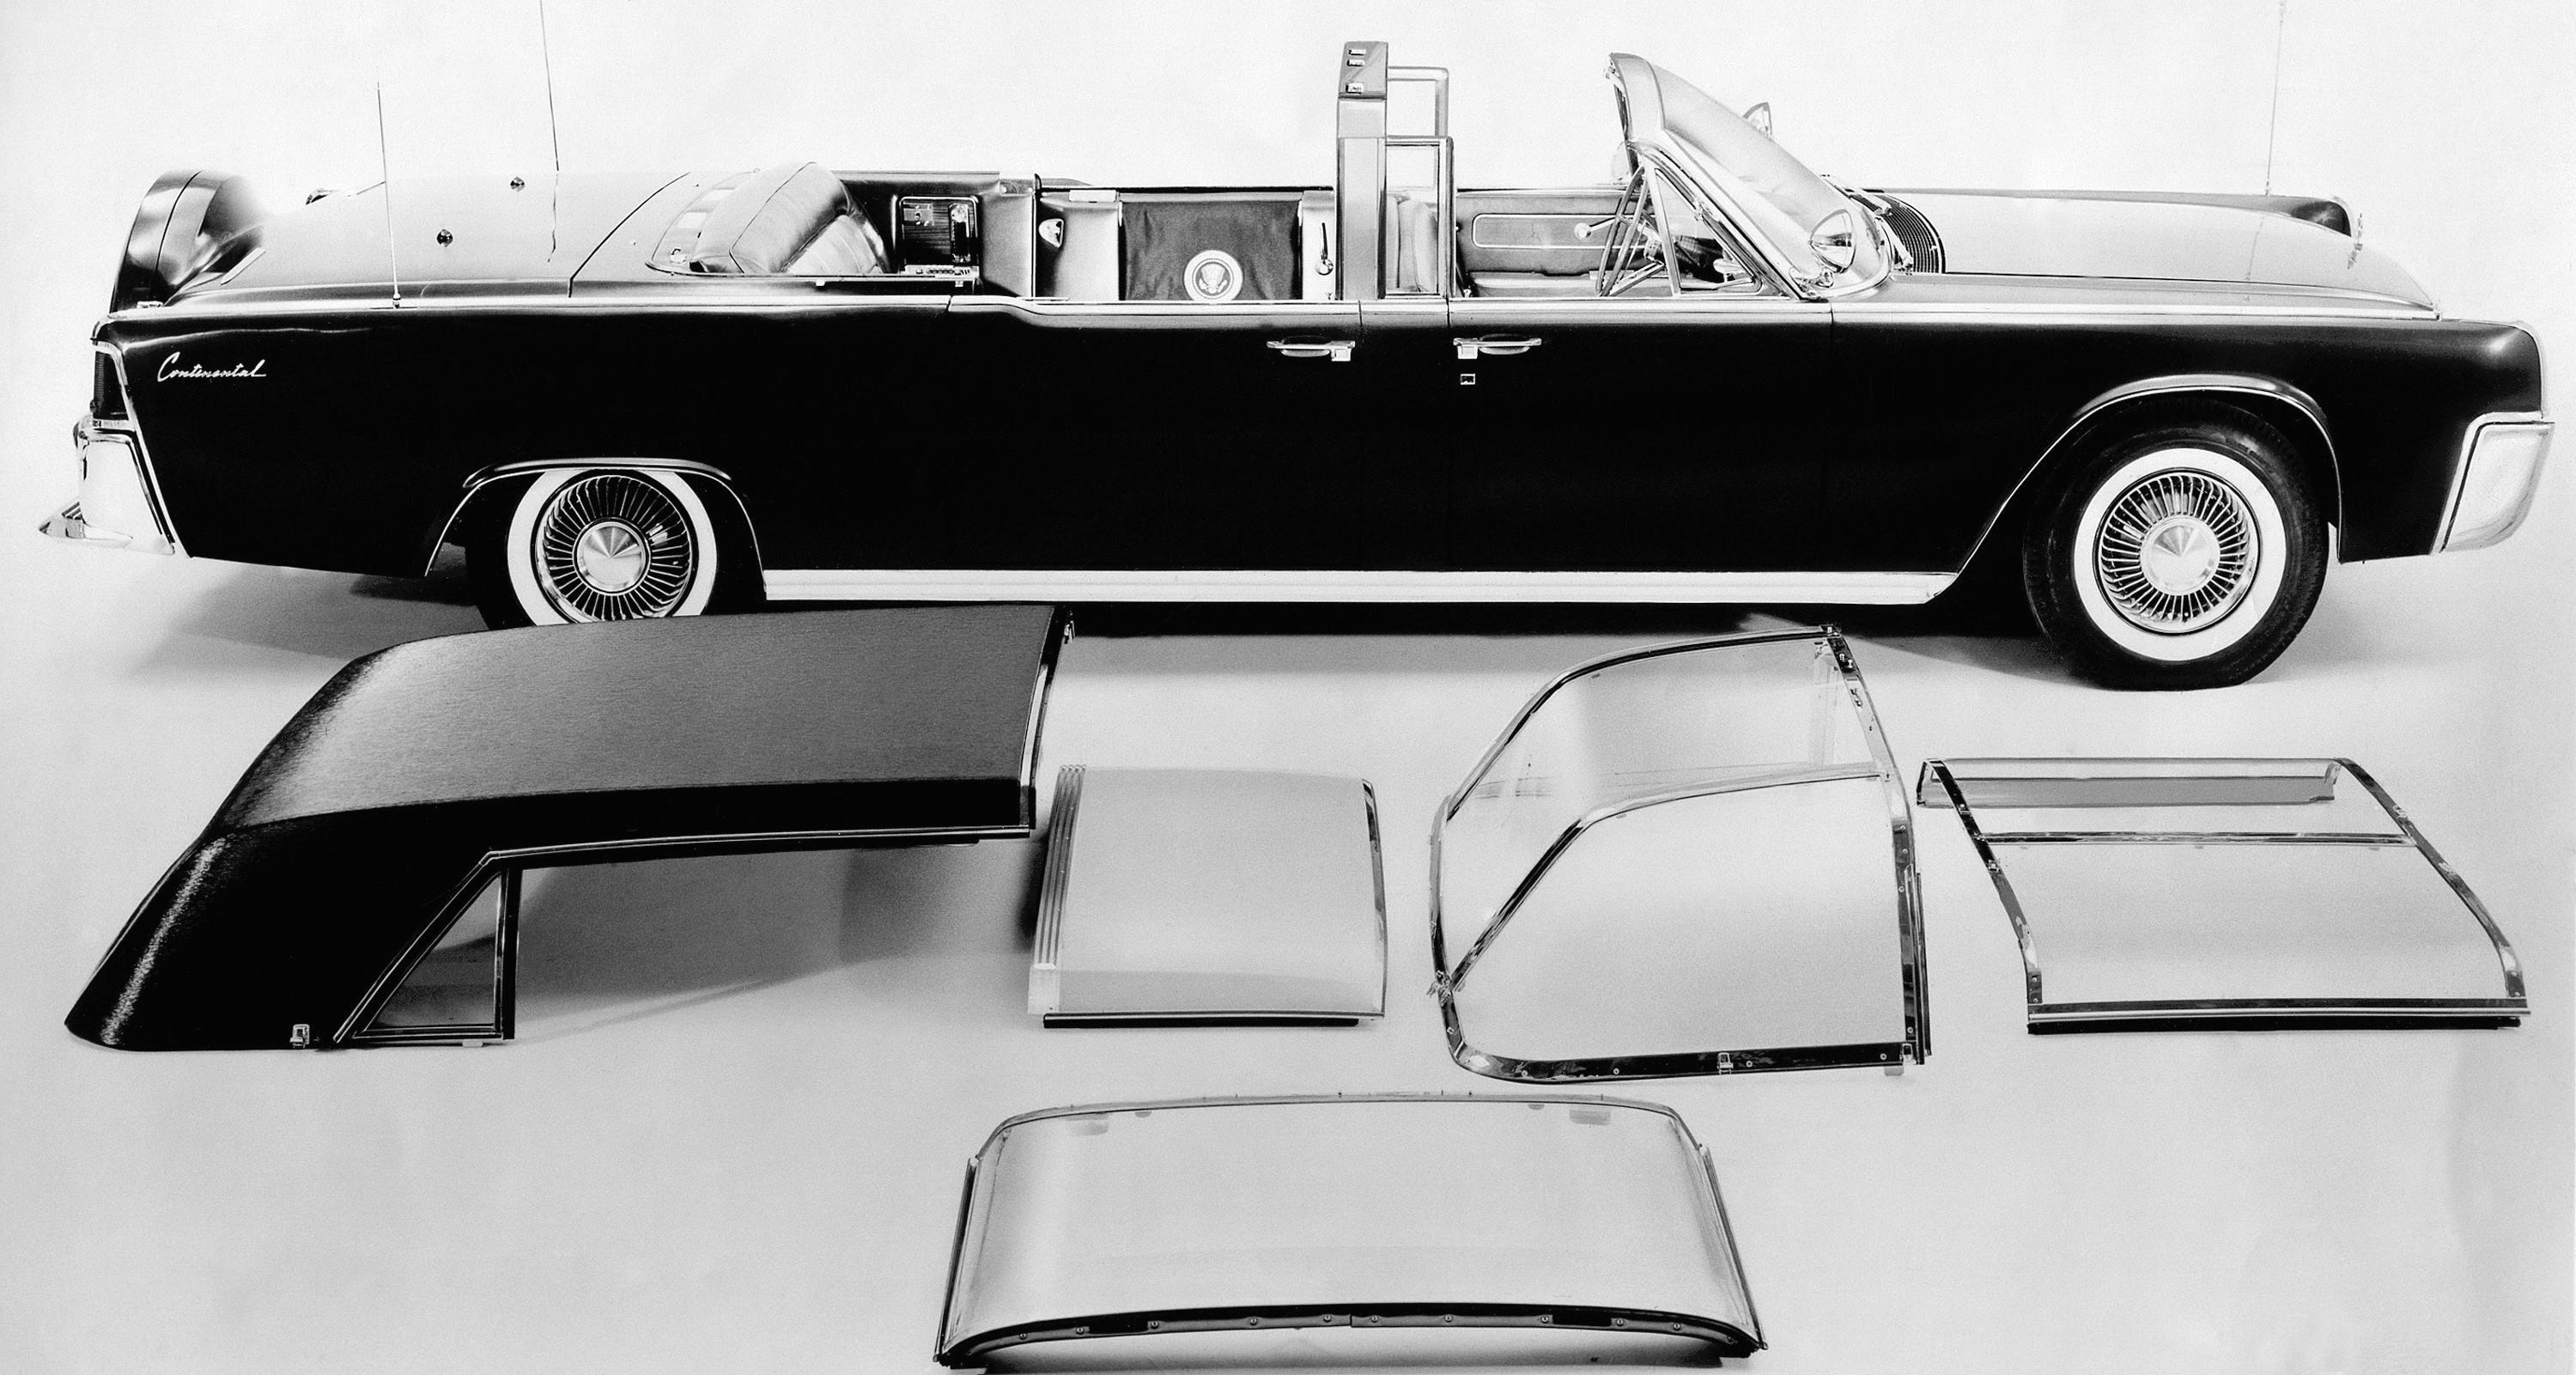 This June 1961 photo provided by the Ford Motor Co. shows President. John F. Kennedy's Lincoln Continental limousine. The limo was the first presidential car equipped with a transparent roof for all compartments and has other options including fabric roof covering, or use as a convertible, as well as combinations for the rear, middle and front compartments.